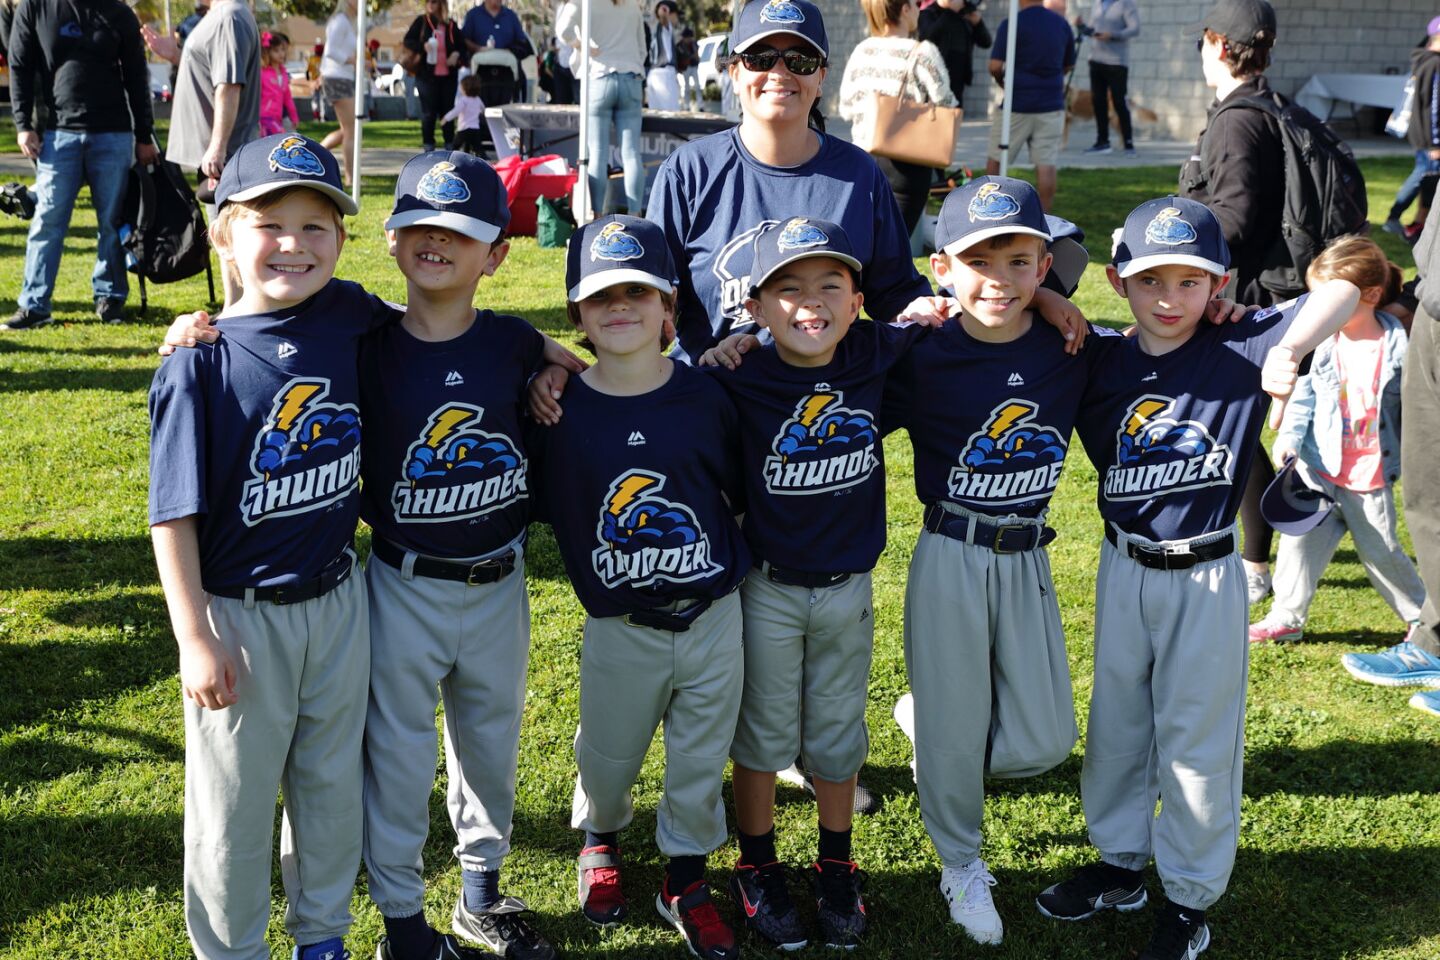 Thunder at the Del Mar Little League Opening Day